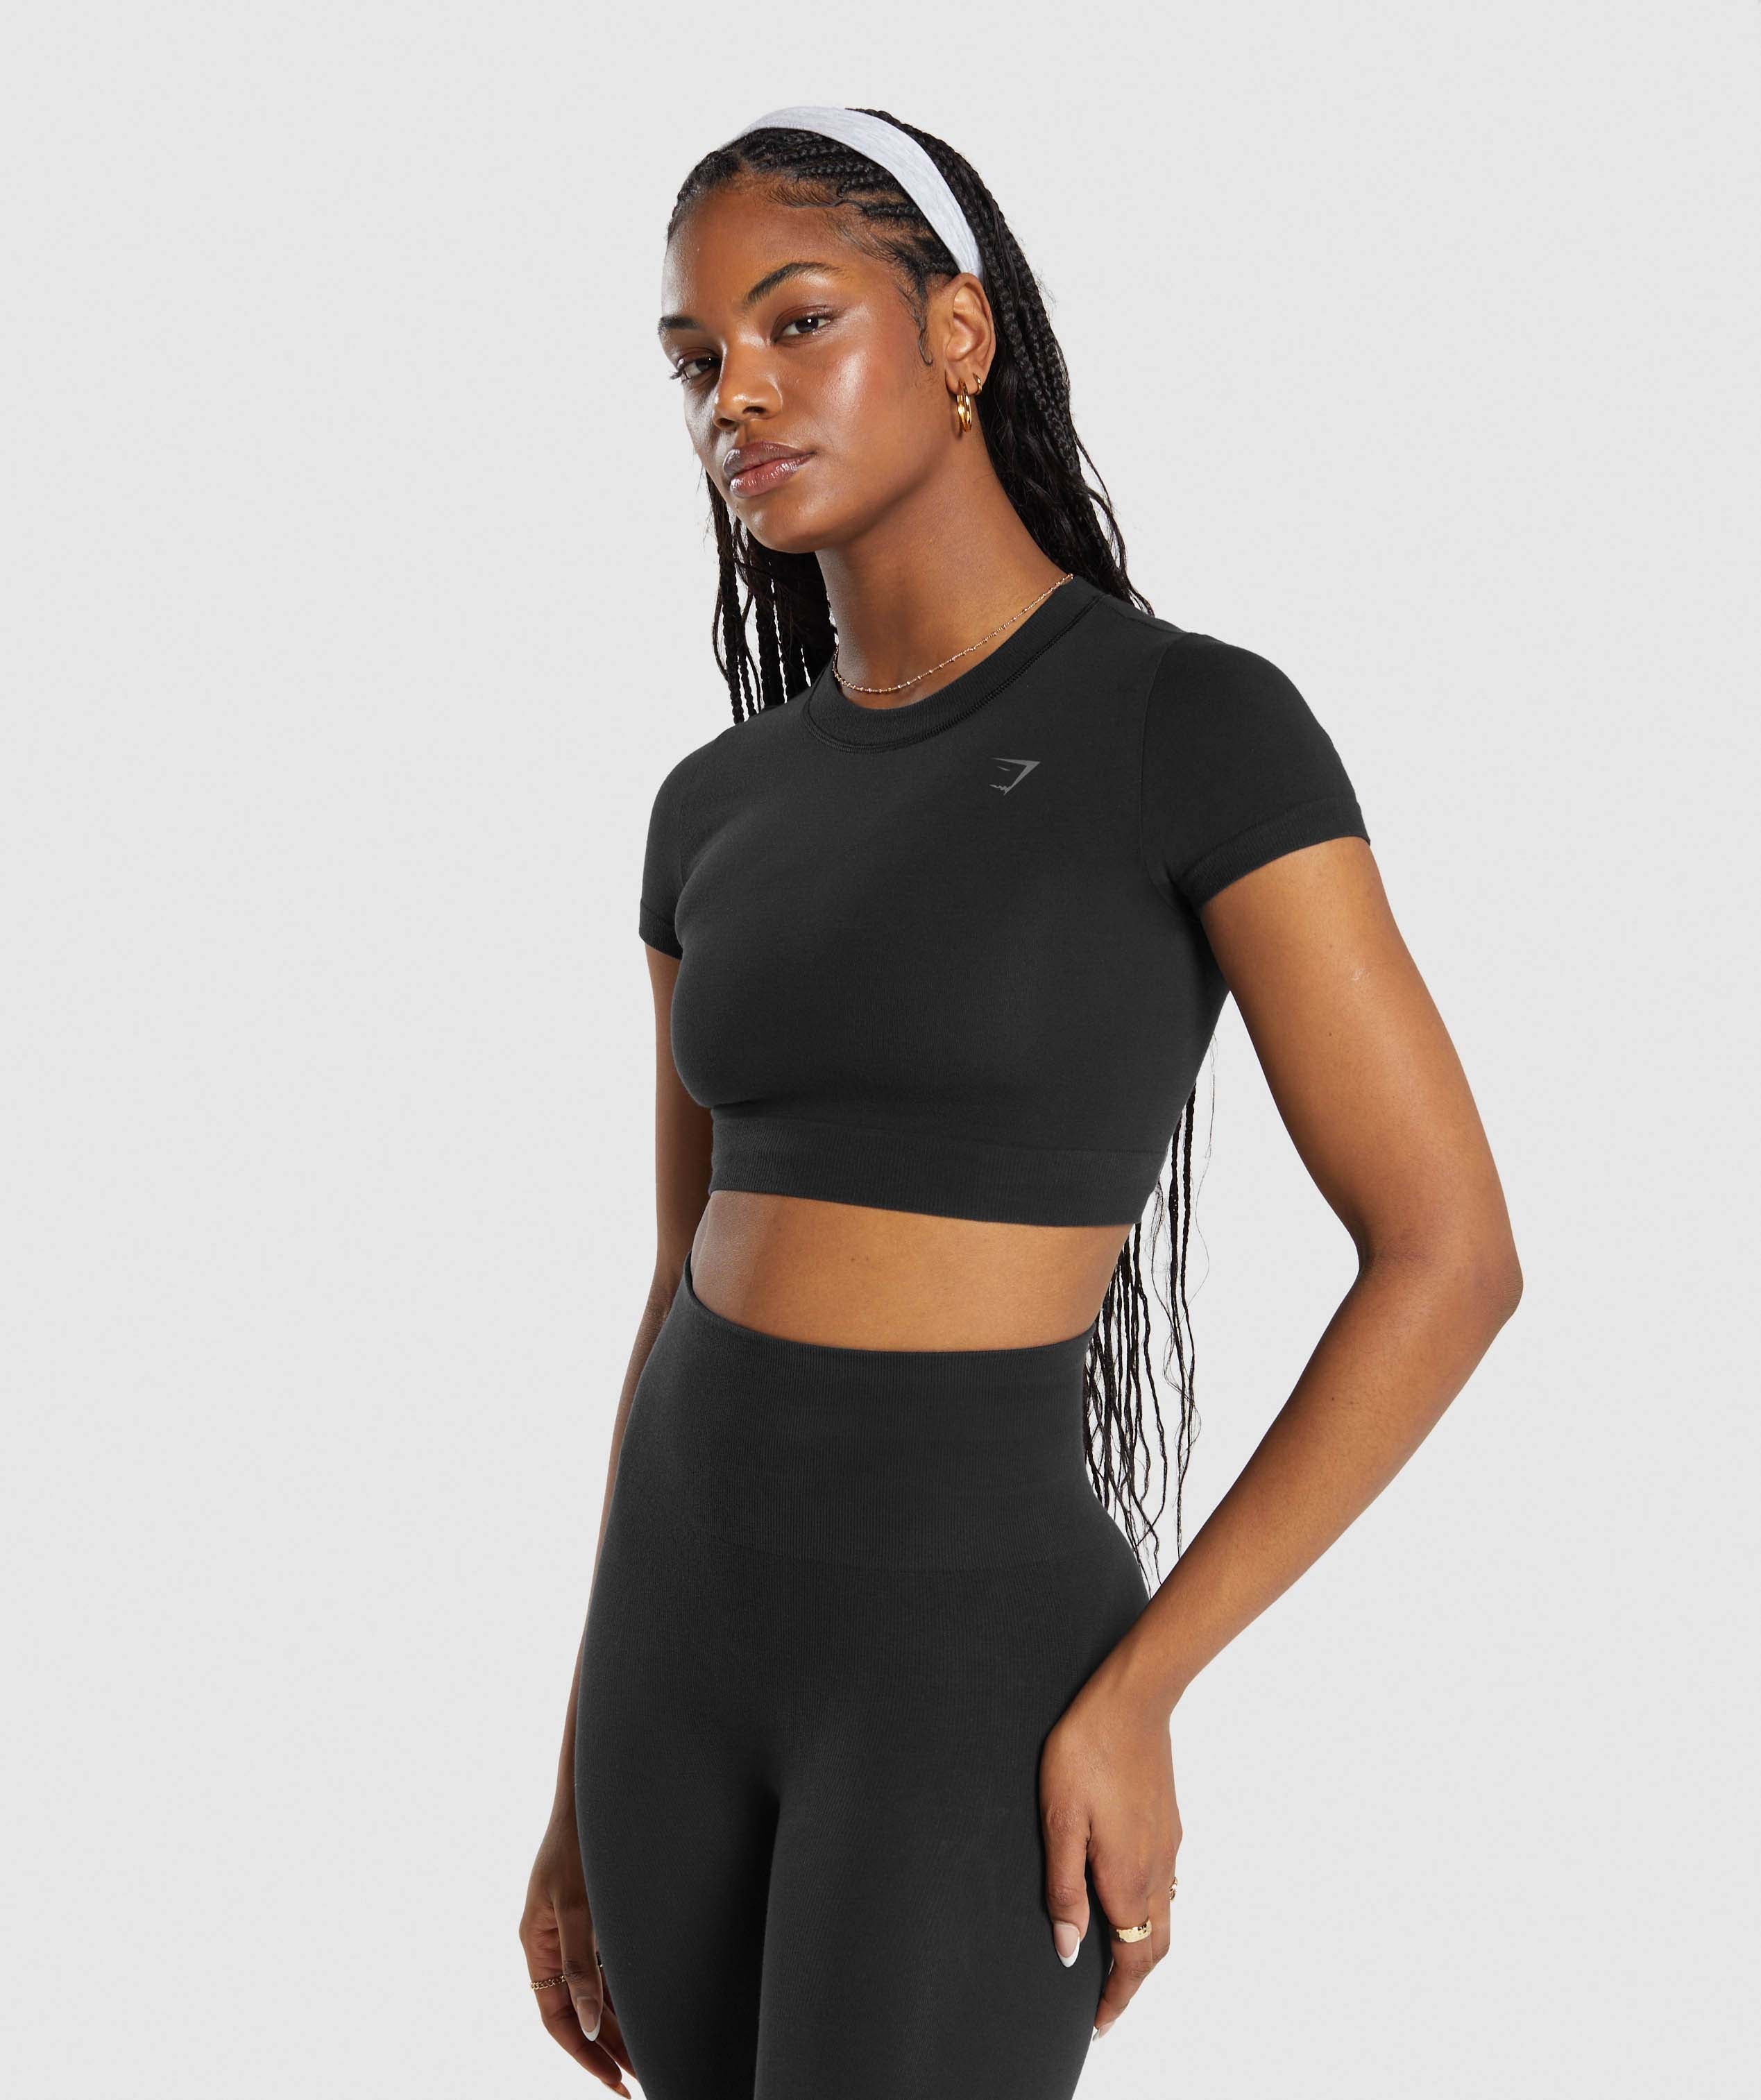 Cotton Seamless Crop Top in Black - view 3